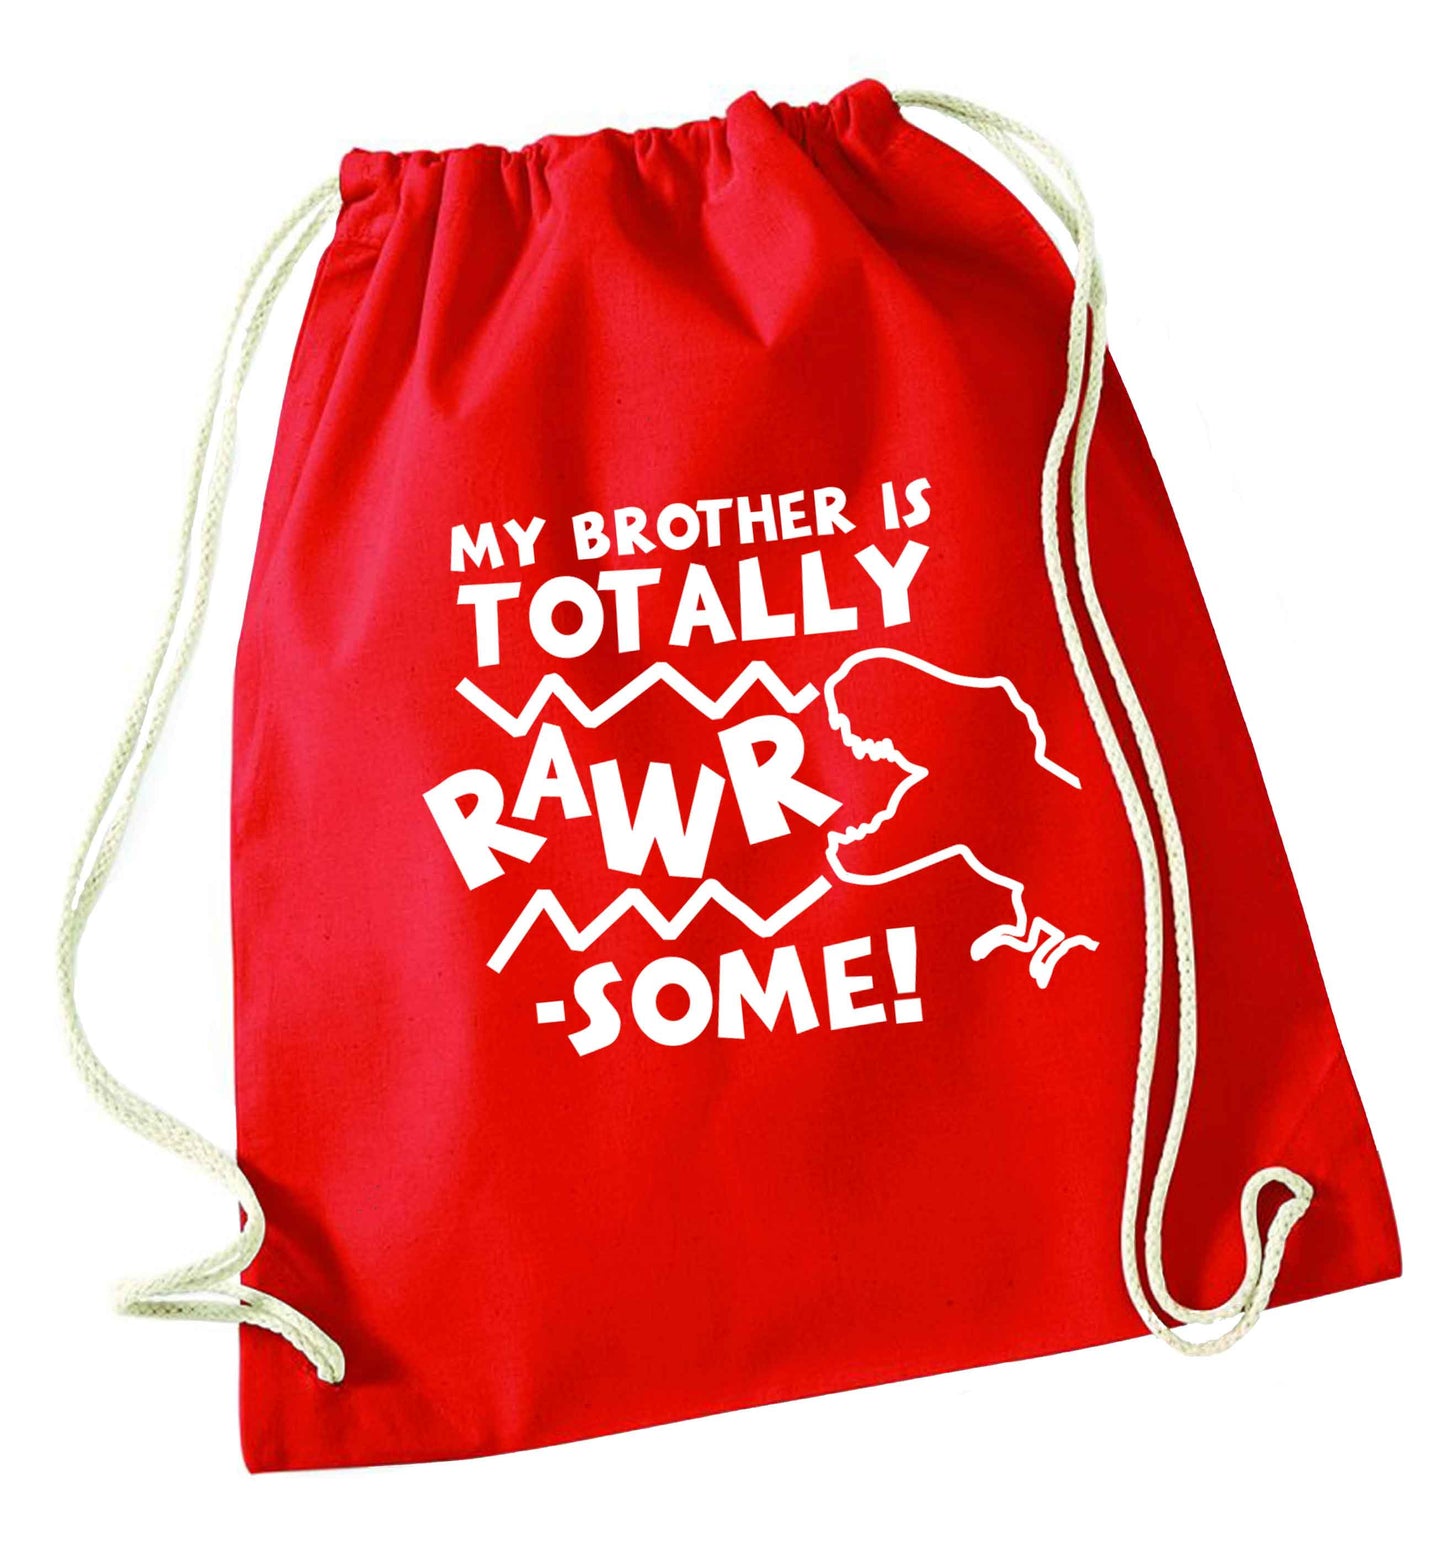 My brother is totally rawrsome red drawstring bag 